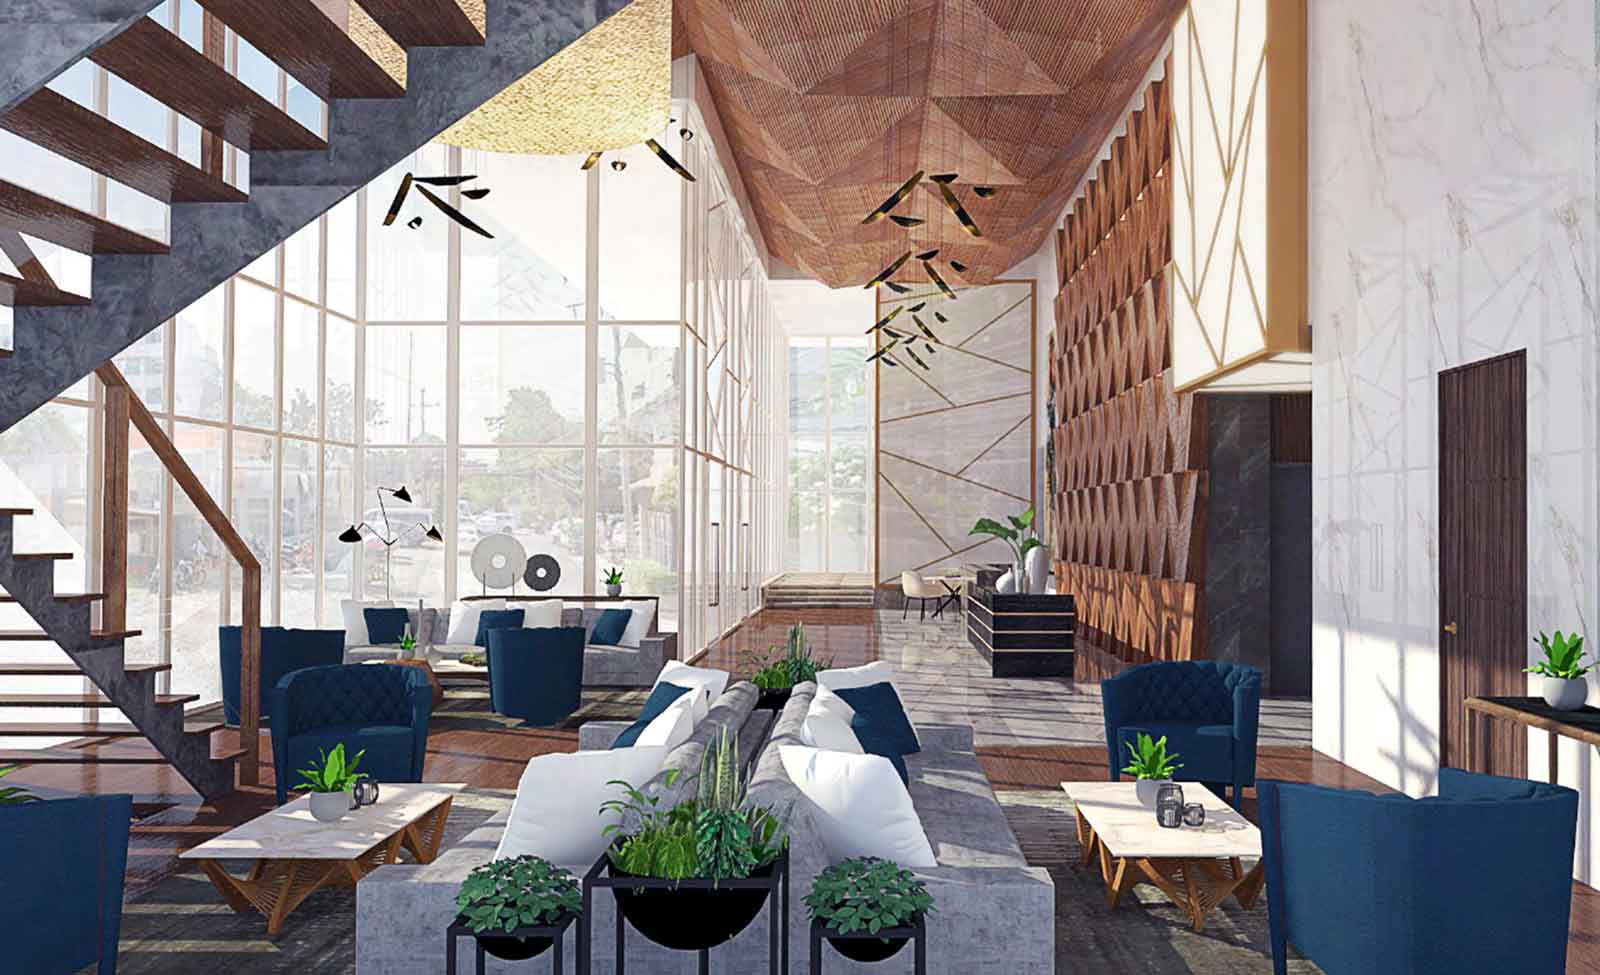 Interior design for the Grand Galleon Hotel Lobby features wooden texturized wall treatment and modern furniture.